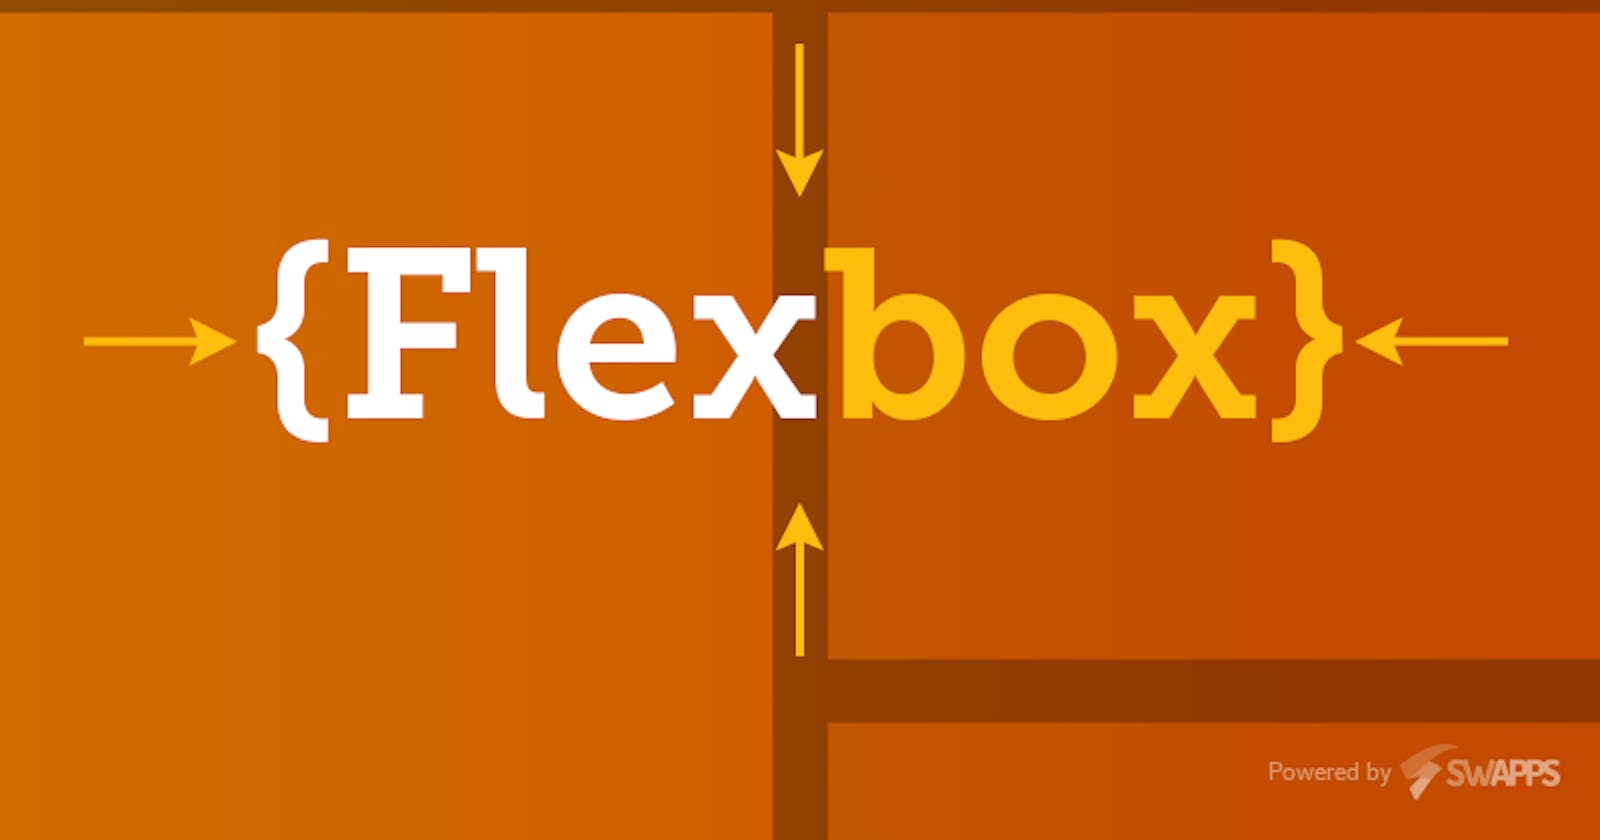 FlexBox - A new way to layout elements in CSS